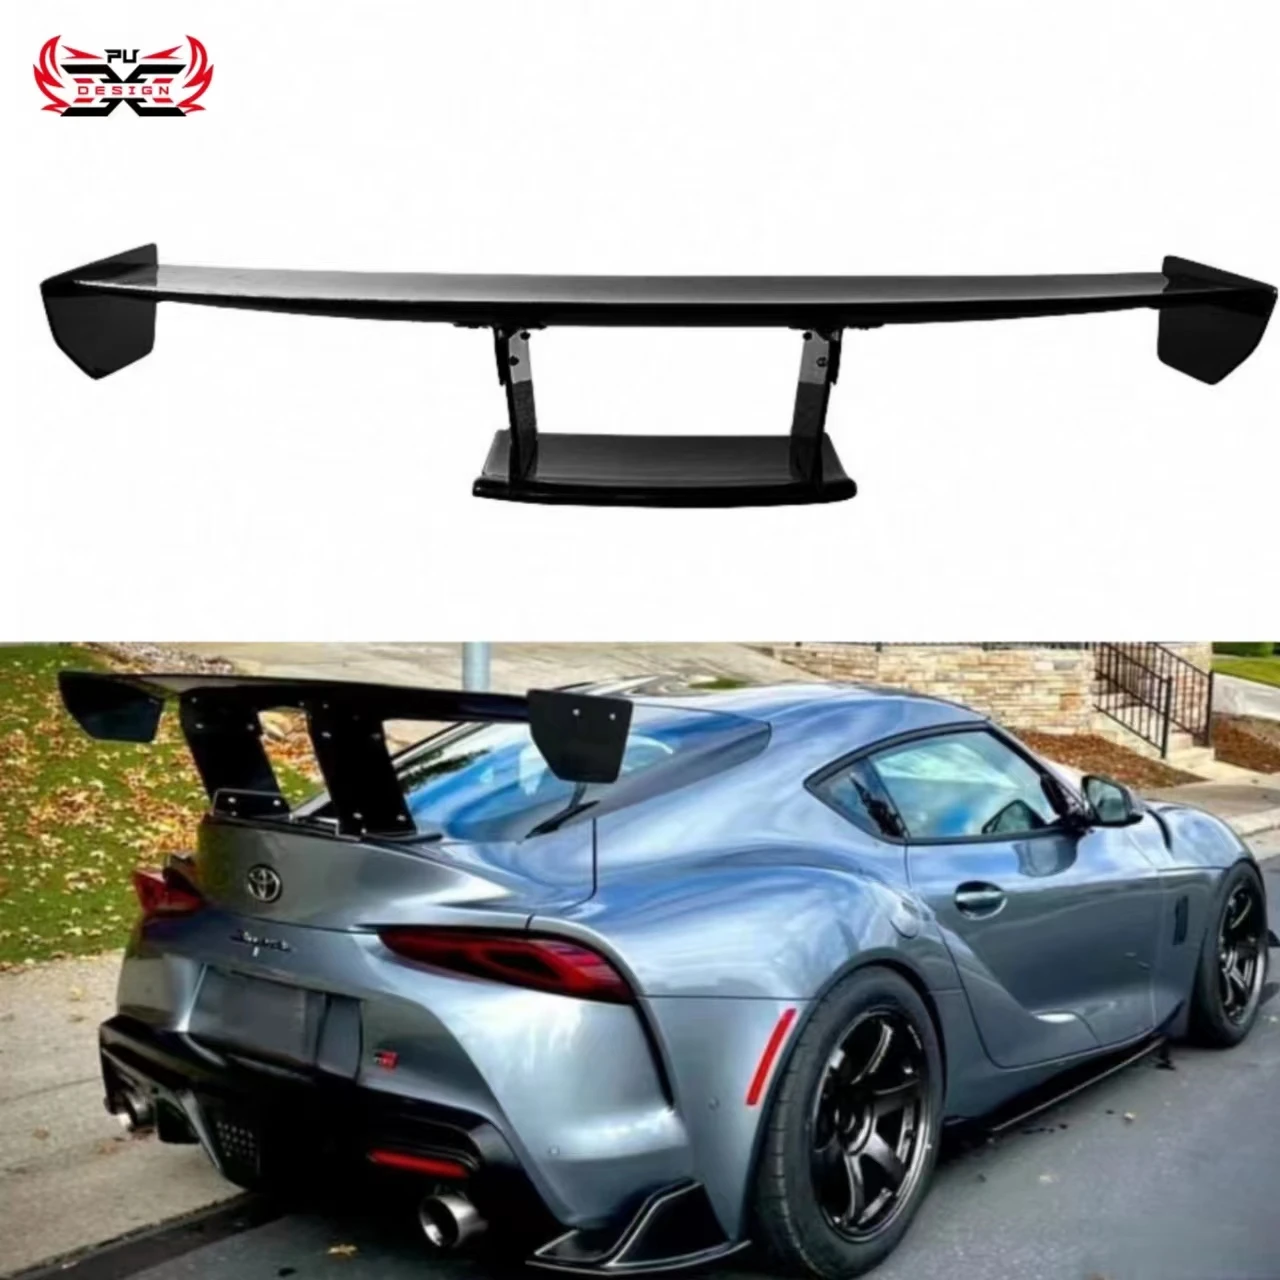 

For Toyota Gr Supra A90 A91 Mkv Carbon Fiber Rear Trunk Wing Varis Style Rear Spoiler High Quality Boot Spoiler Lip Wings